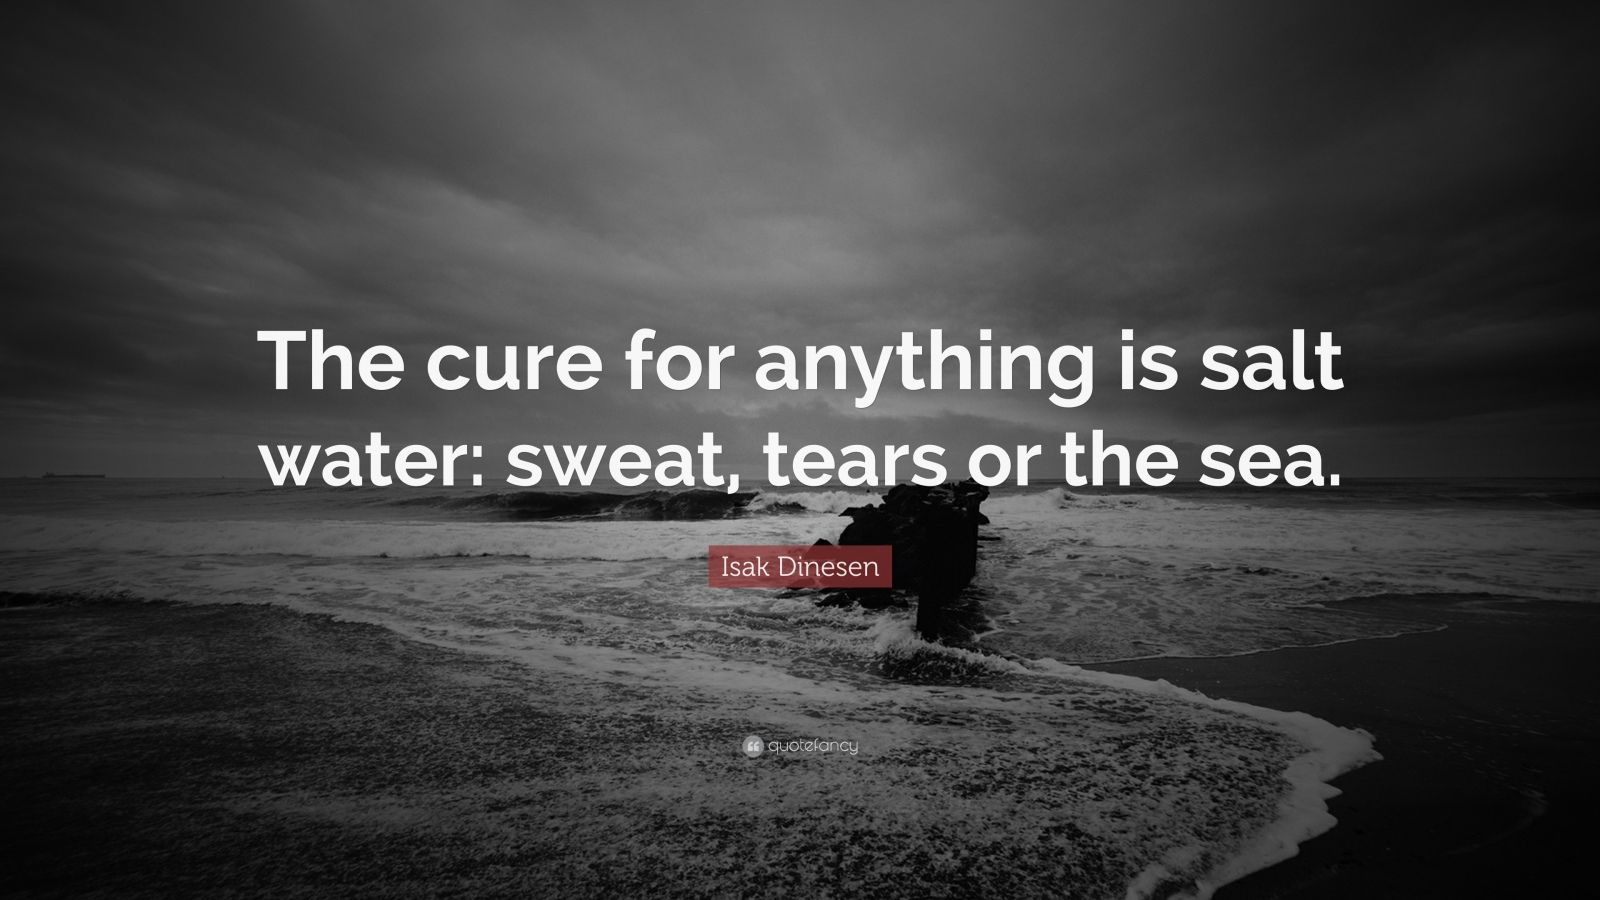 Isak Dinesen Quote: "The cure for anything is salt water: sweat, tears or the sea." (12 ...